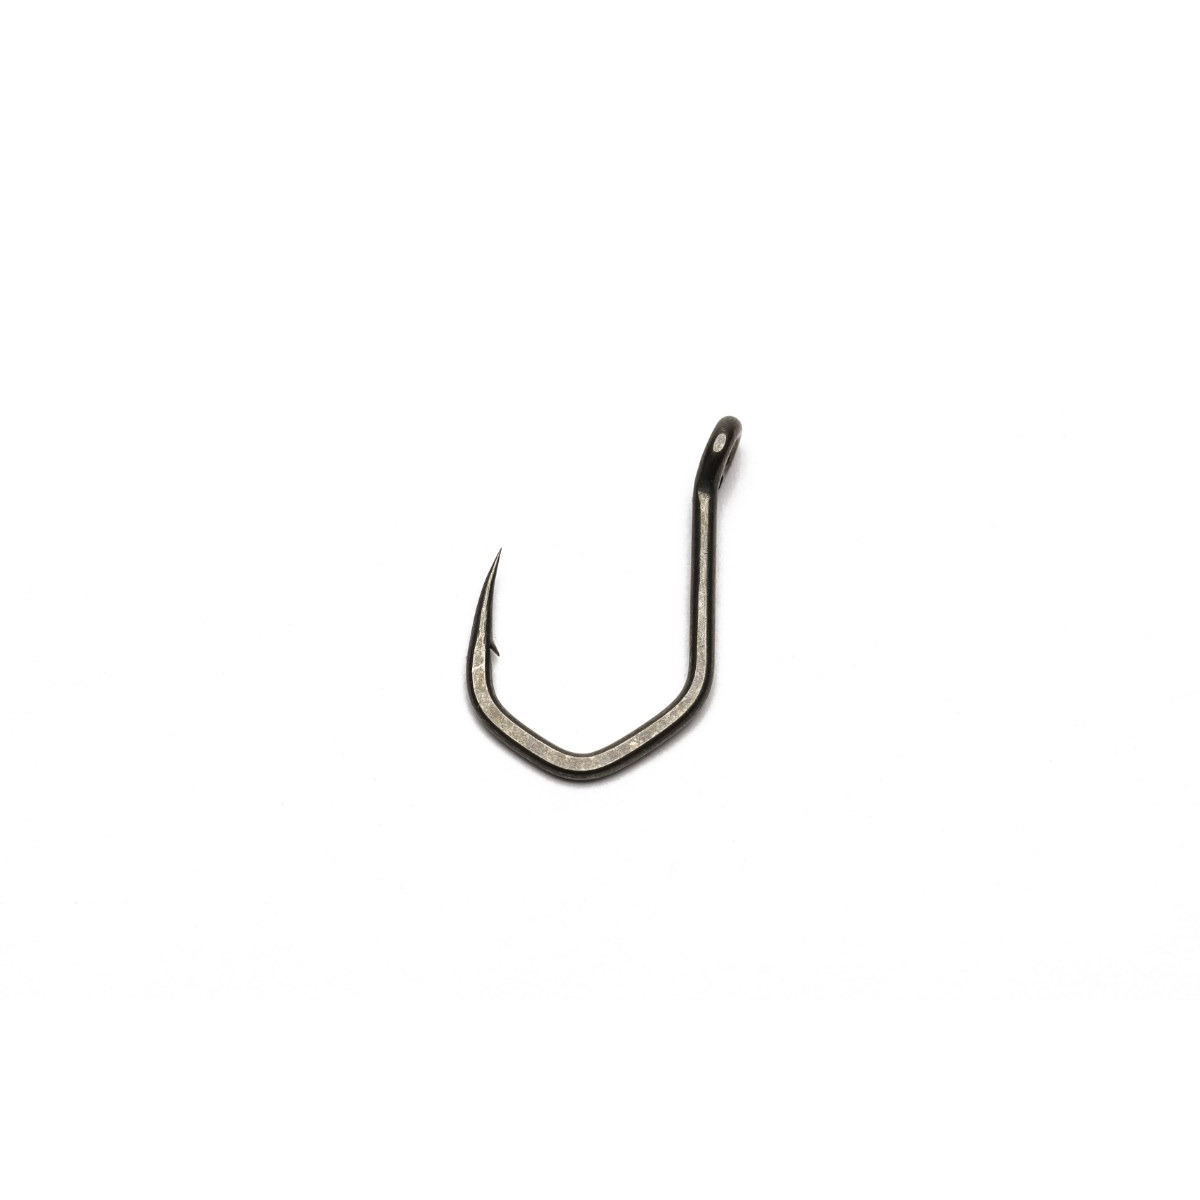 Nash Chod Claw - Size 2 Micro Barbed